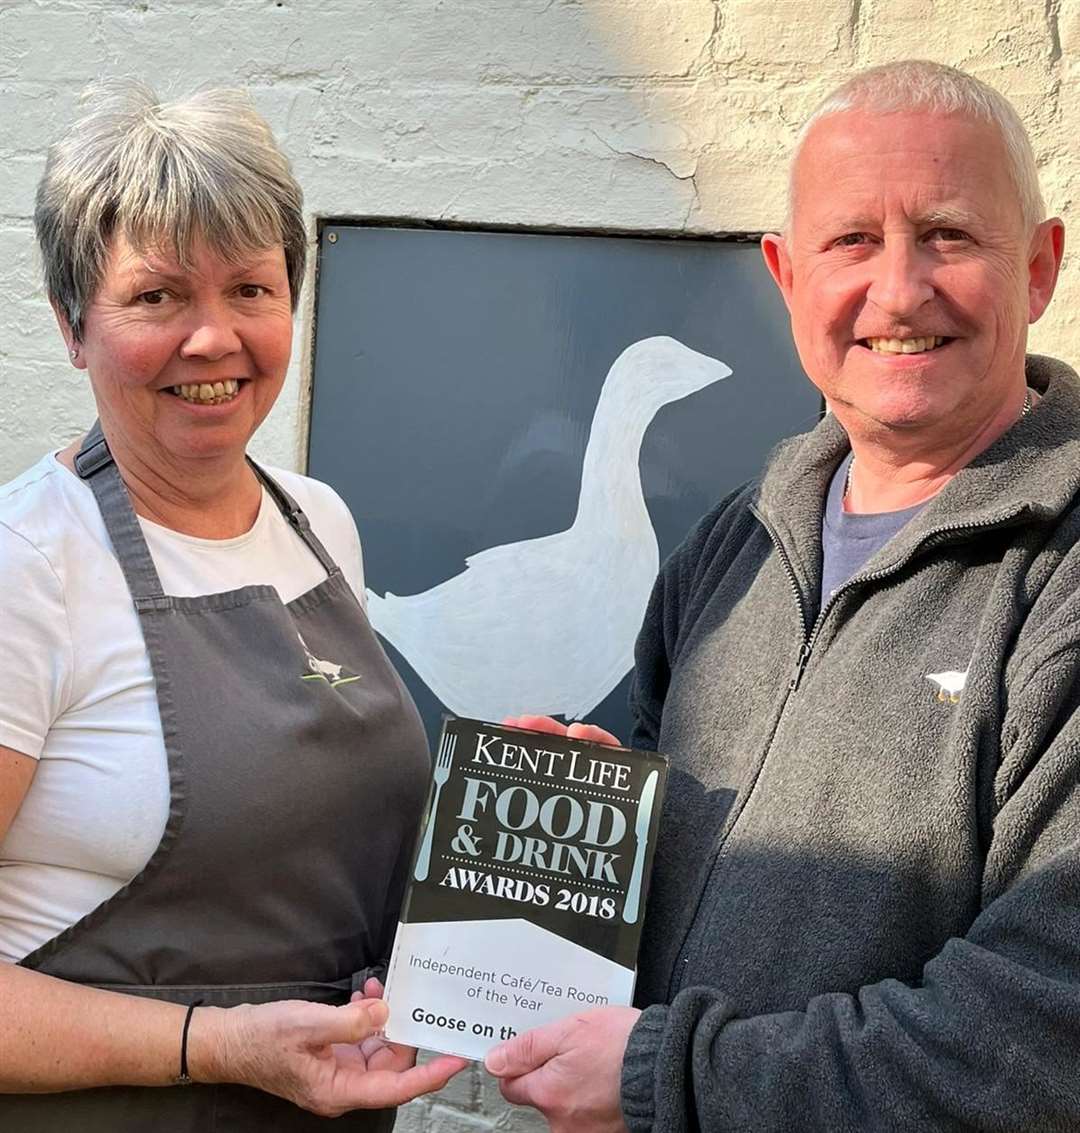 Alistair Bassett and his wife Lisa Dixon-Bassett run the Goose on the Green cafe at Walmer, near Deal